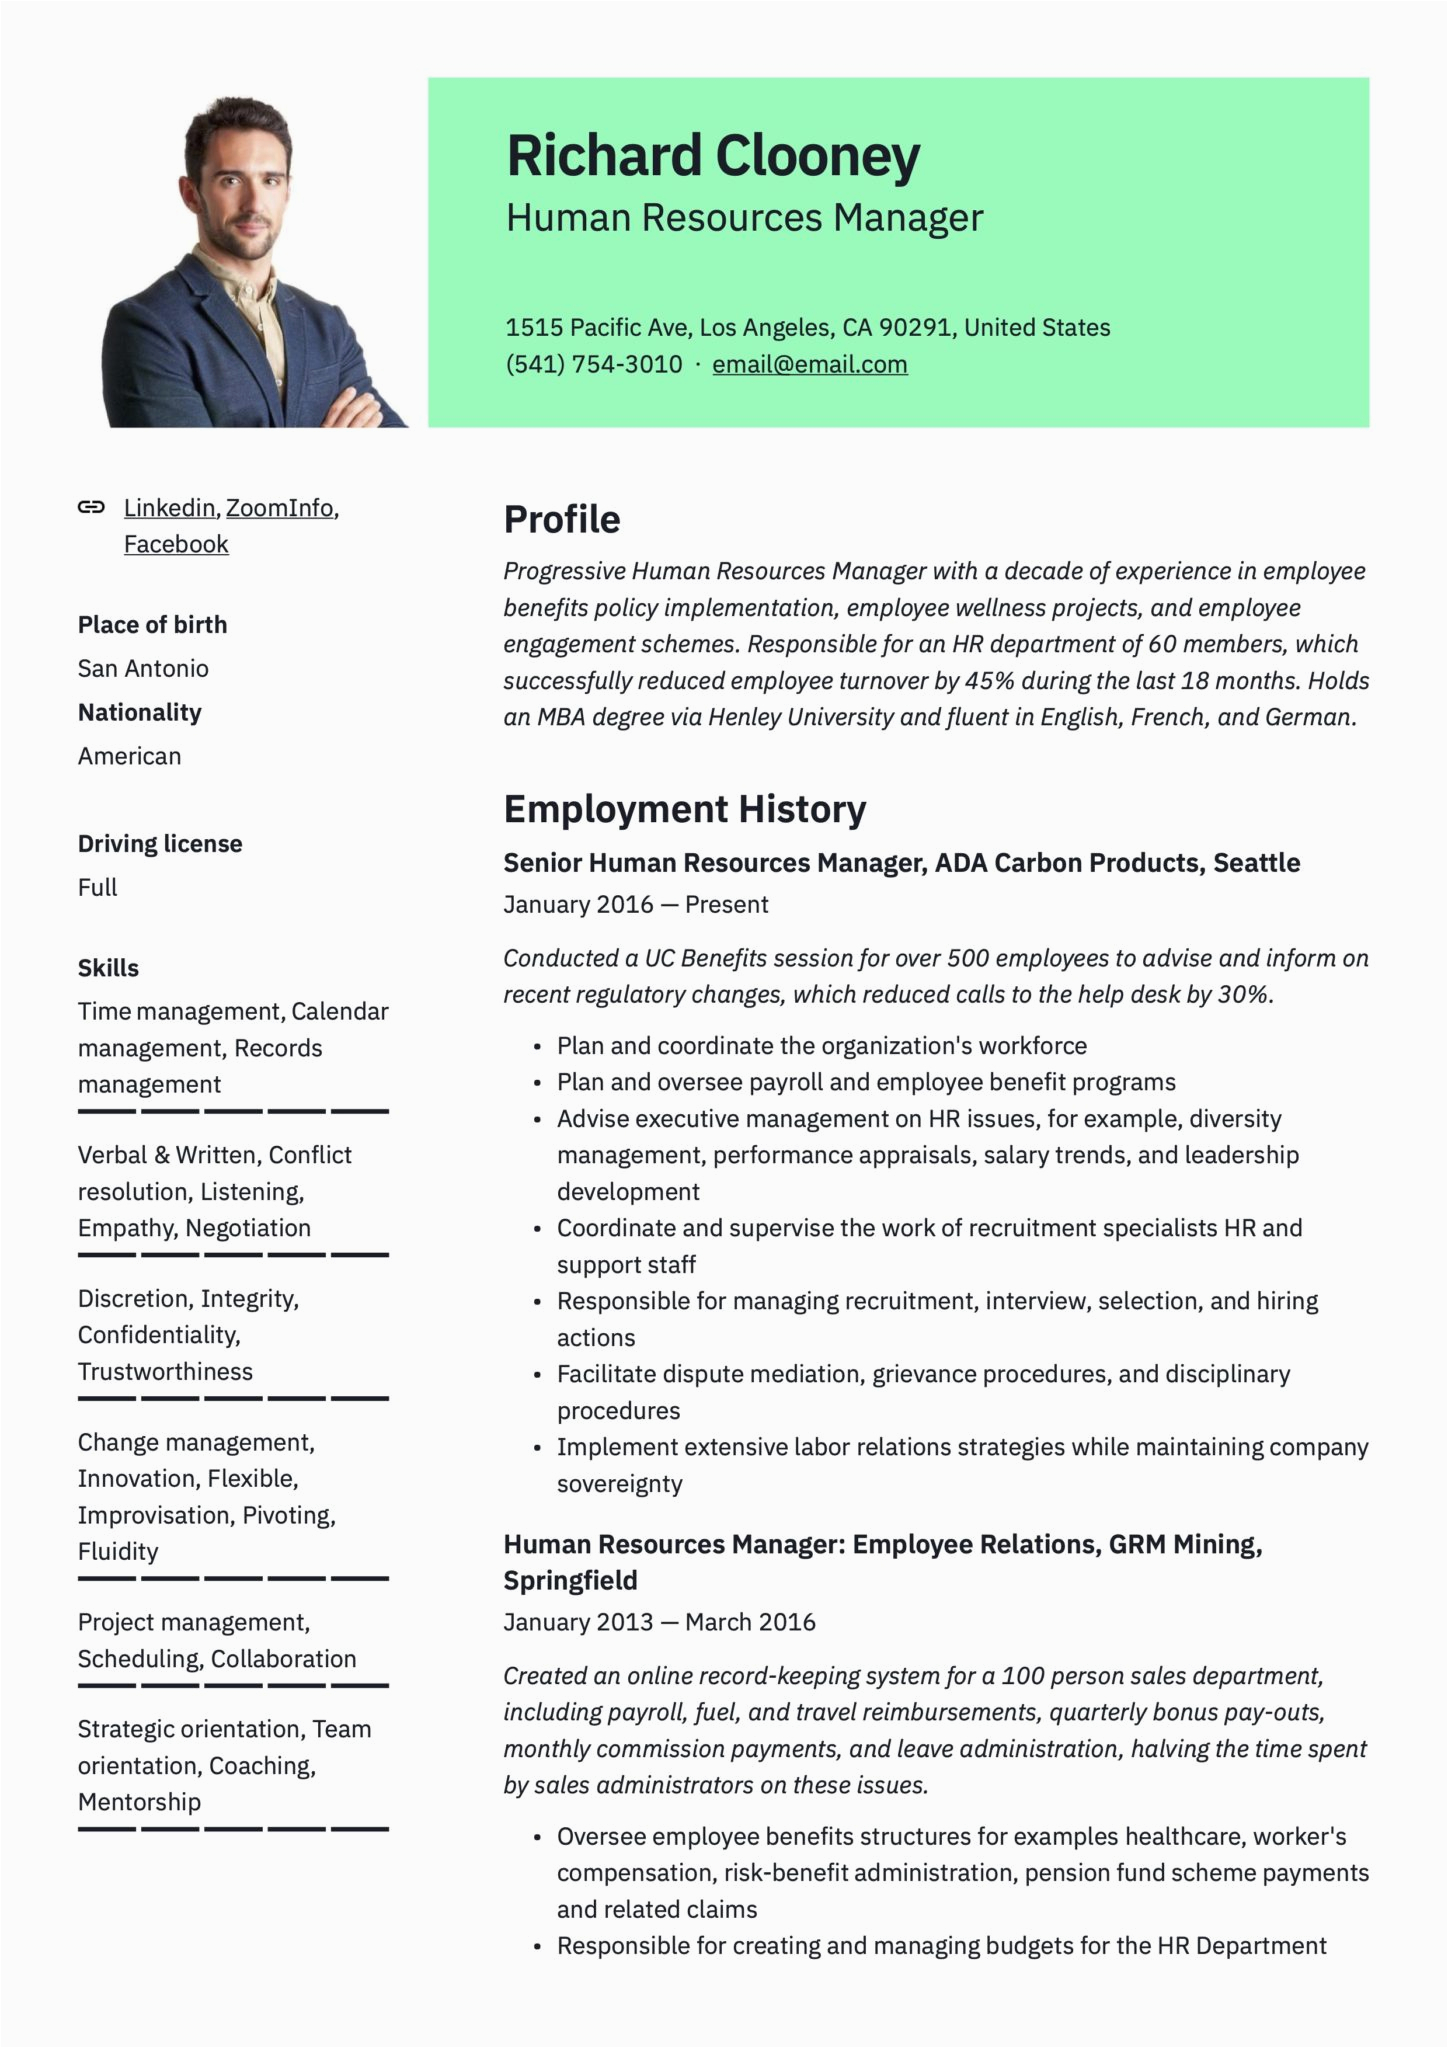 Resume Profile Samples for Human Resources 17 Human Resources Manager Resumes & Guide